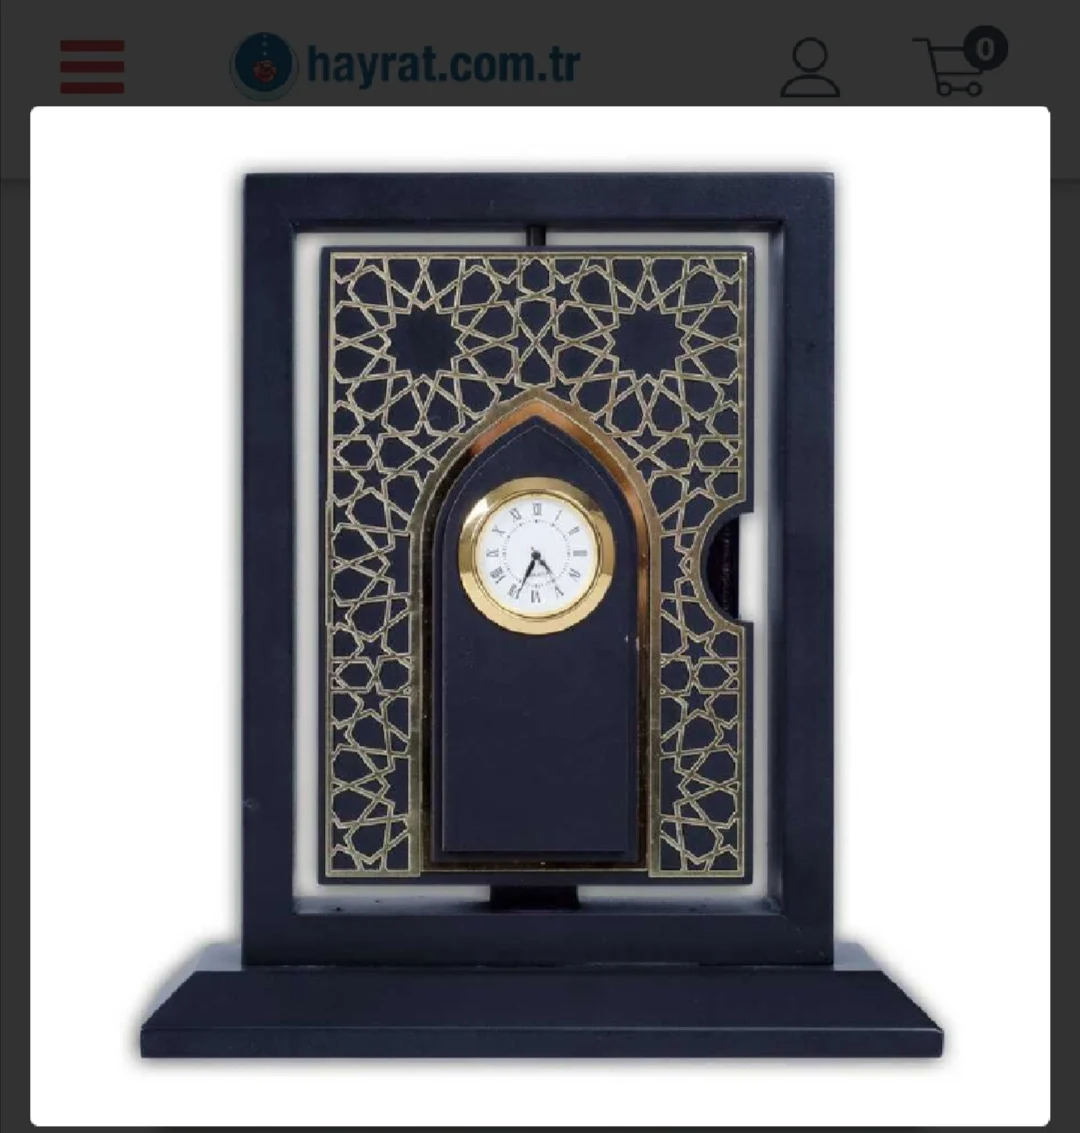 Islamic  Quran in Artisanal Wooden Crafted Vertical Box with Clock